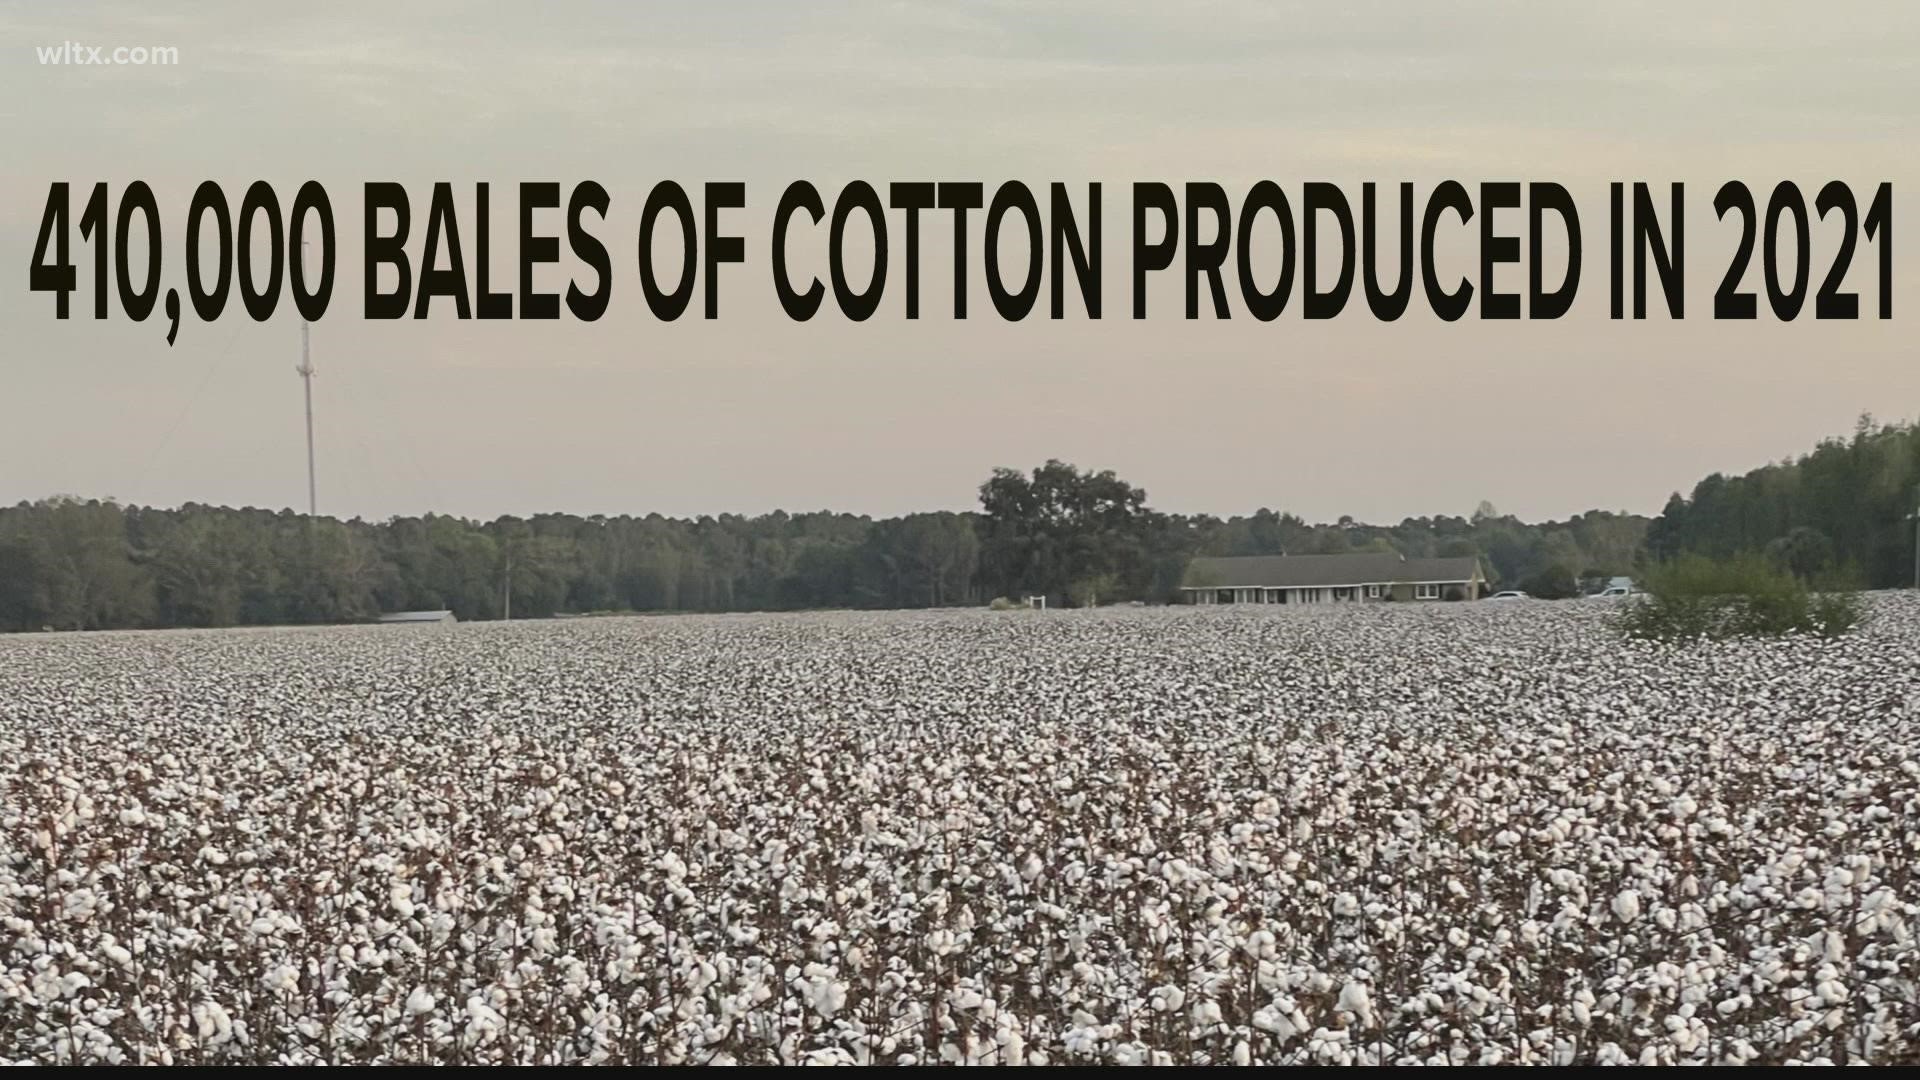 The South Carolina Department of Agriculture reports statewide there were an estimated 410,000 bales of cotton produced. That's a 37% increase from last year.